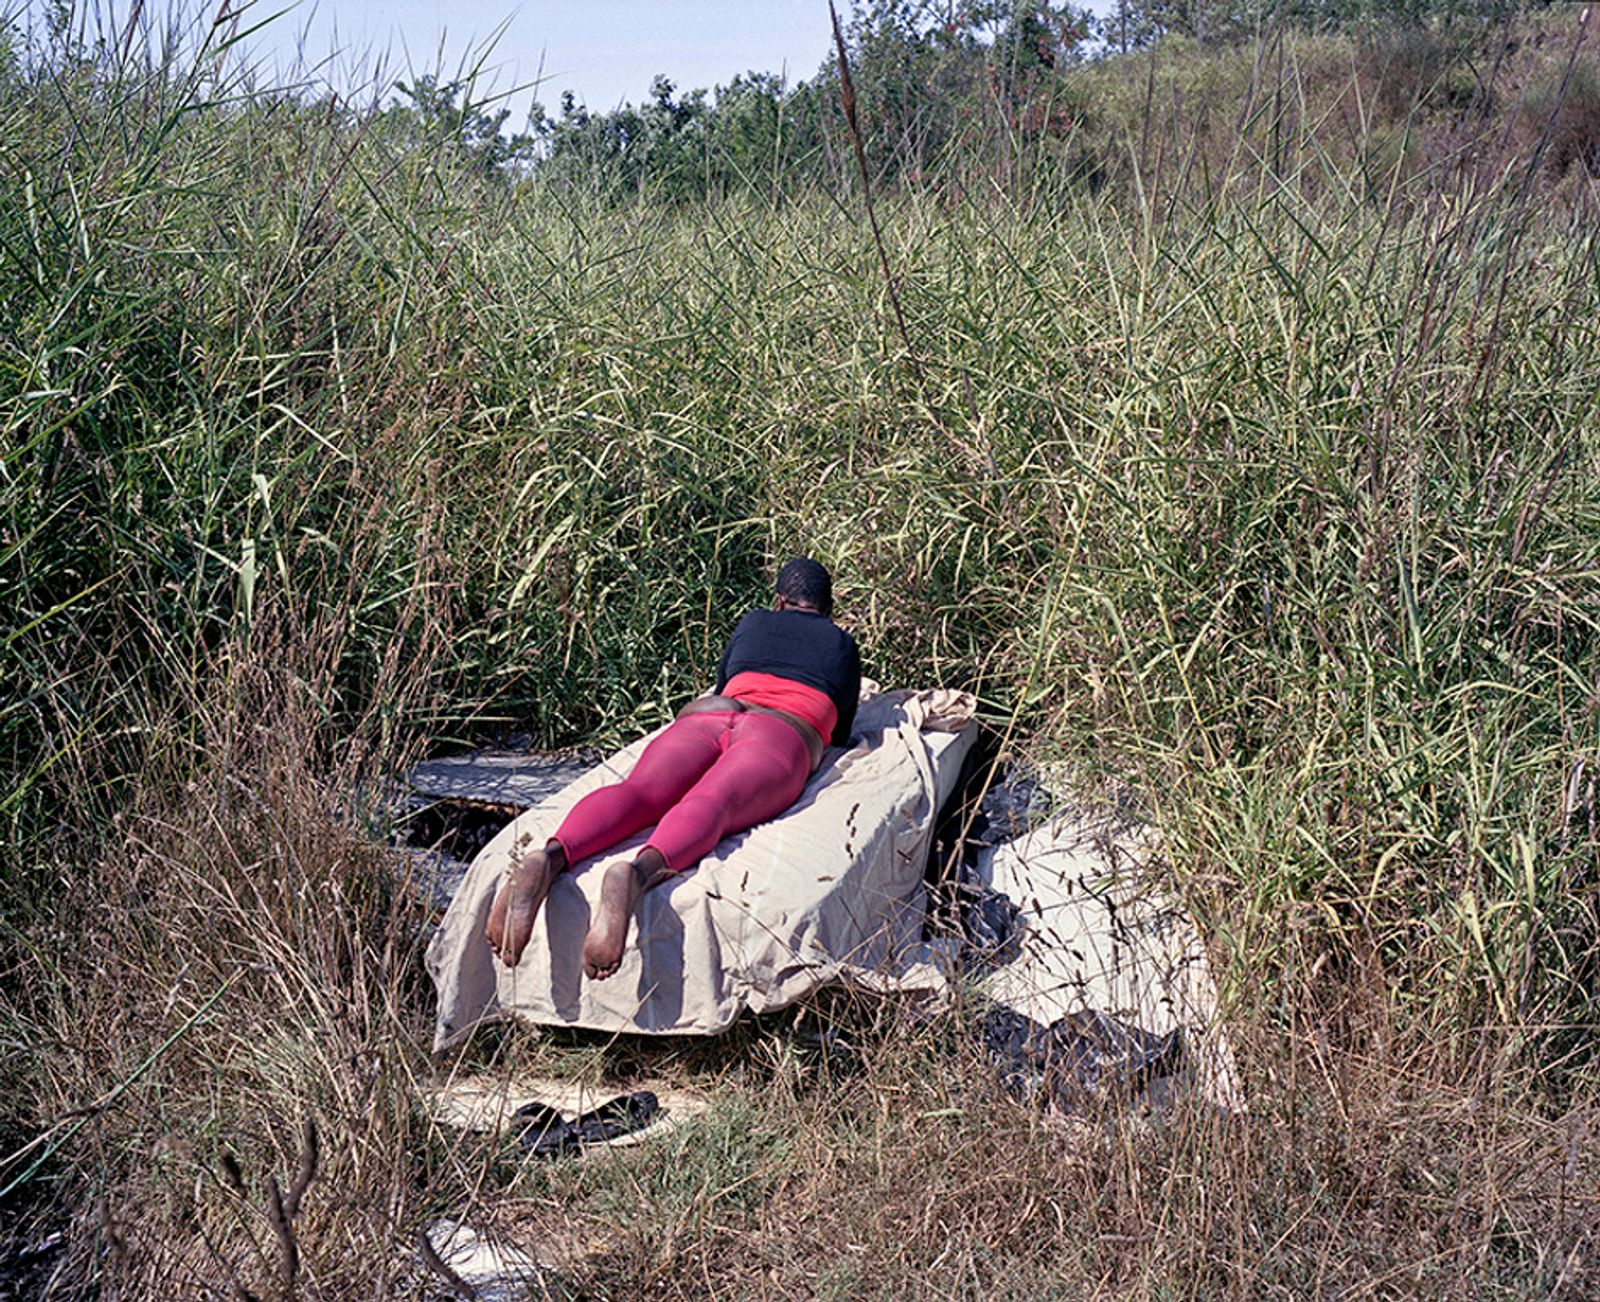 © Paolo Patrizi - Francesca, a sex worker, on her makeshift bed